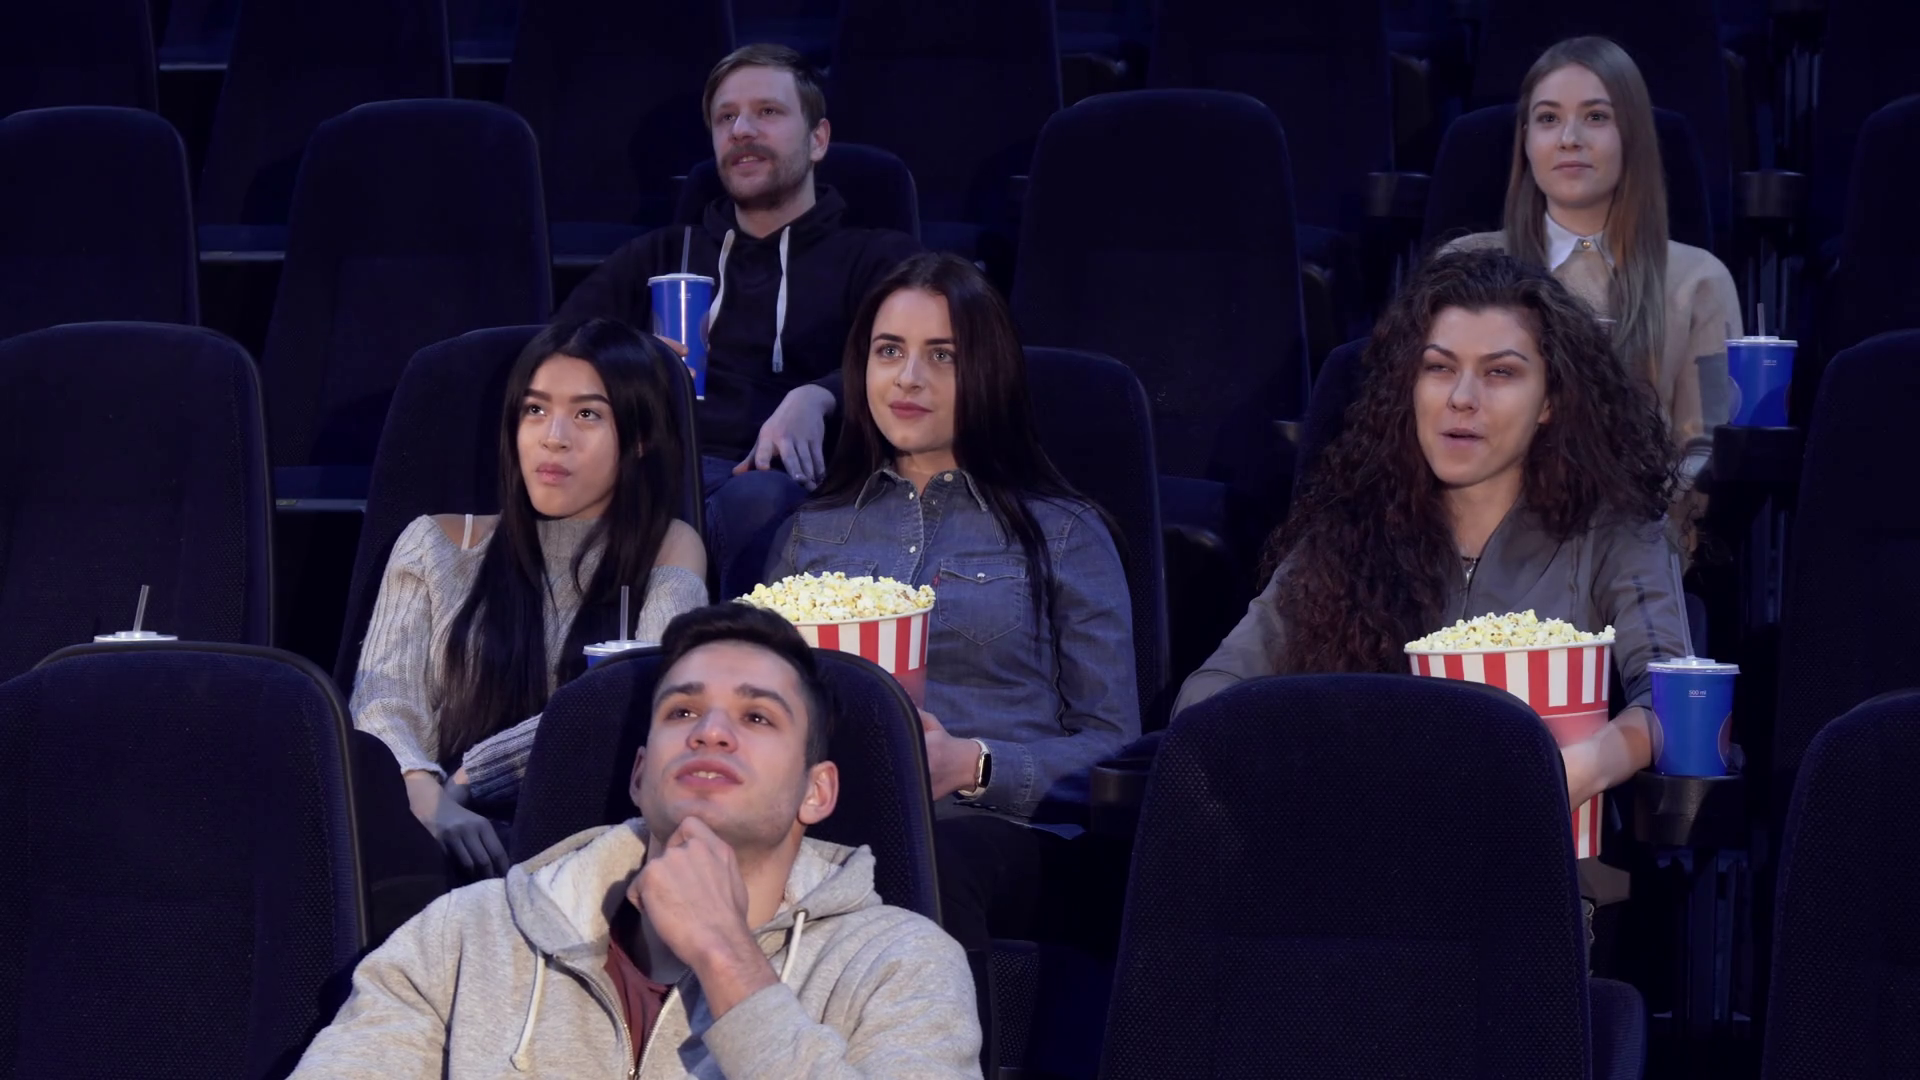 young-people-watching-movie-at-the-movie-theater-two-boys-and-four-girls-sitting-on-different-rows-at-the-cinema-asian-teenage-girl-talking-to-caucasian-girl_hfenlwxvrg_thumbnail-full01.png